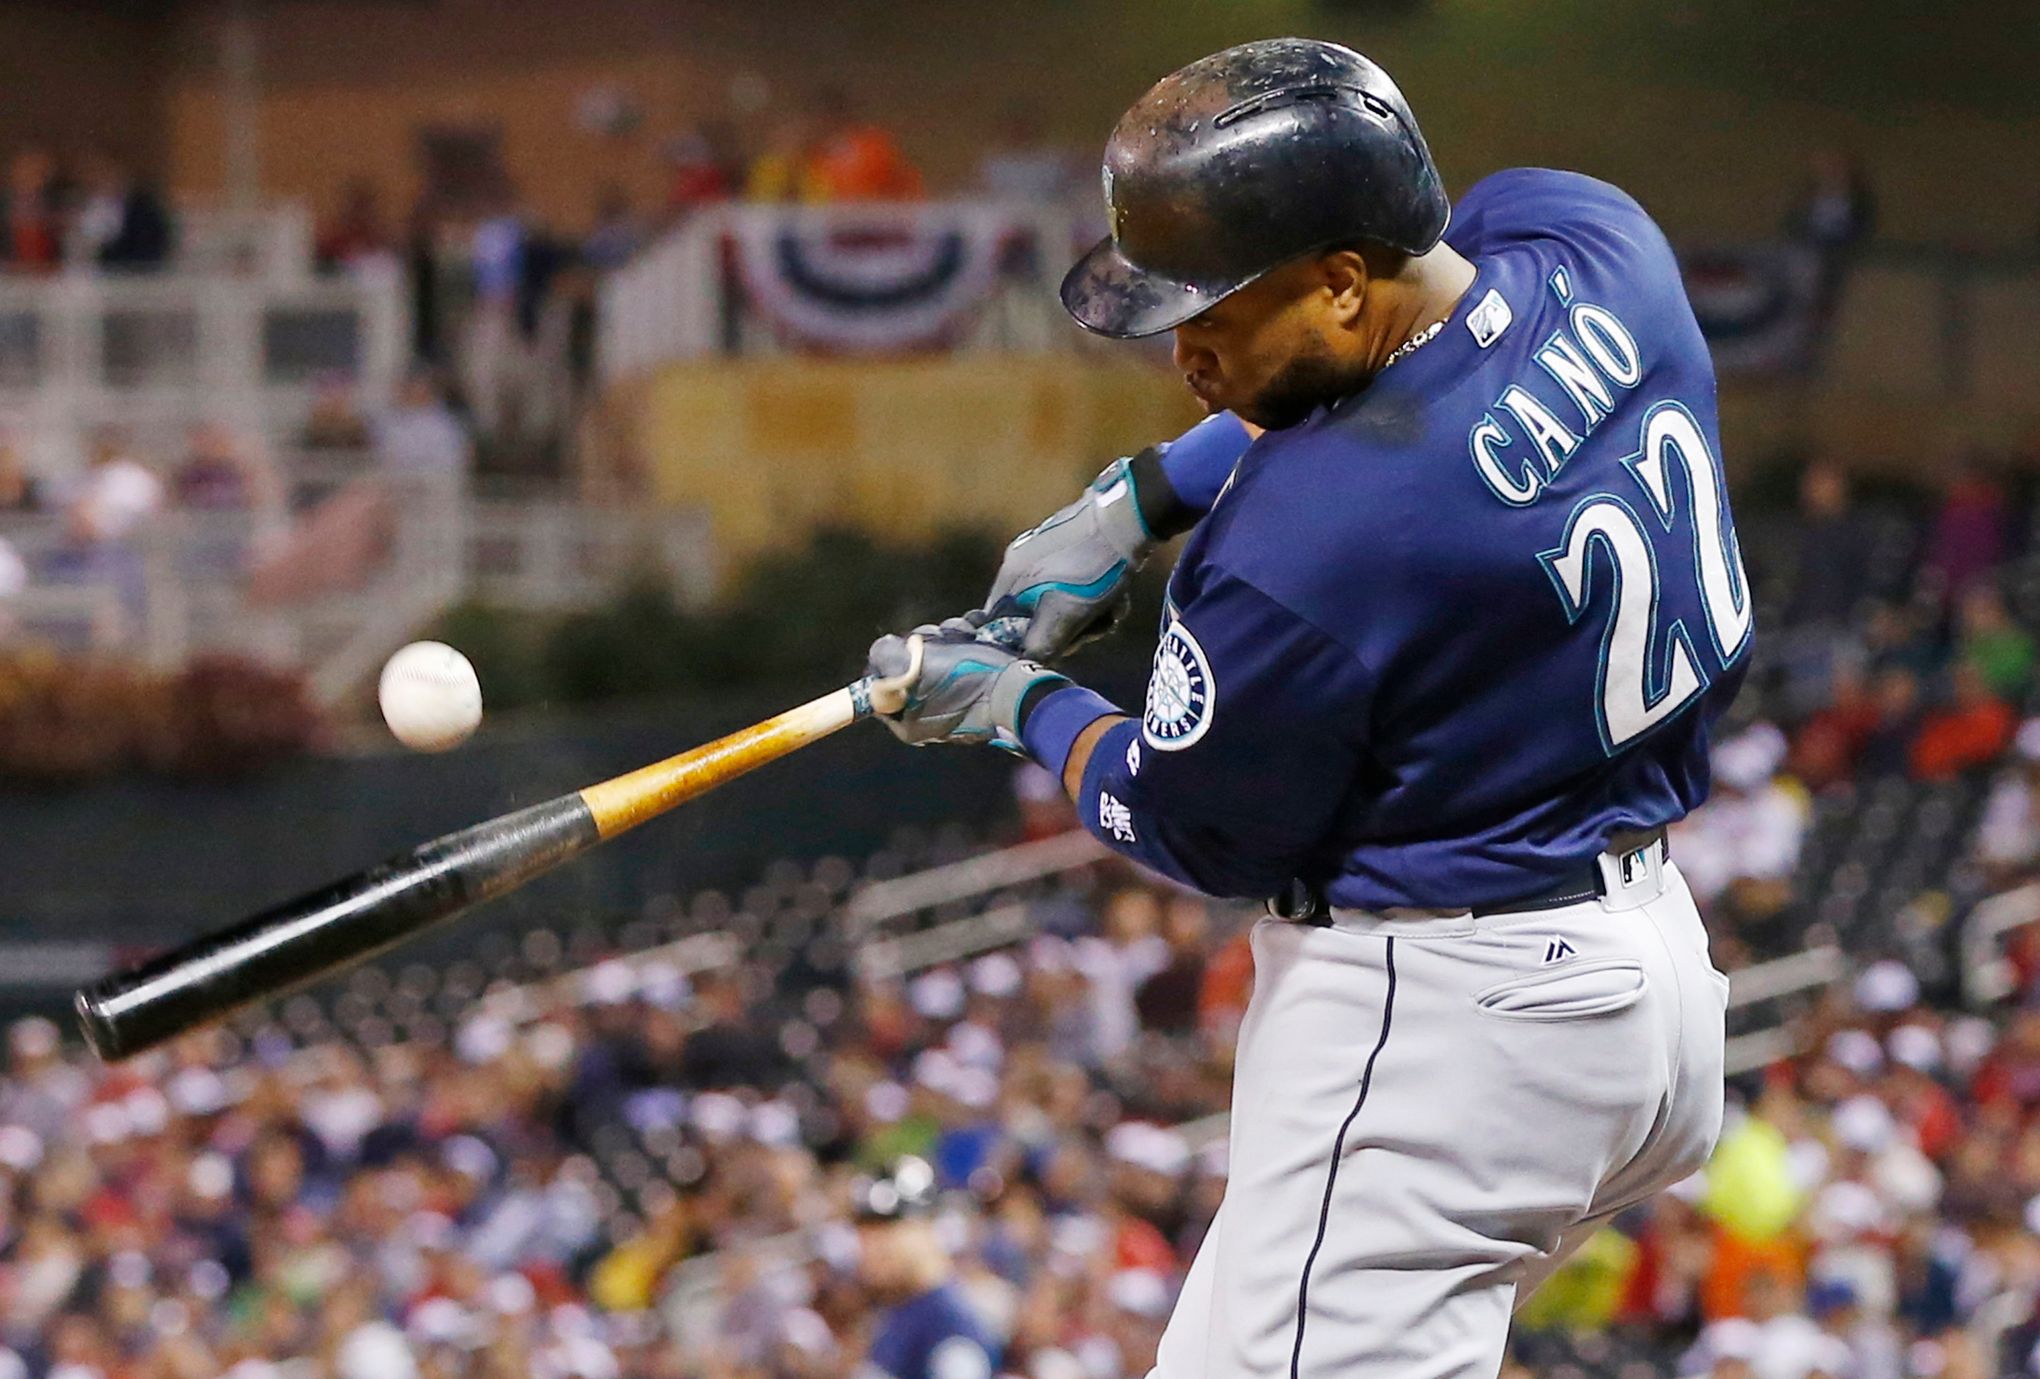 Robinson Cano agrees to deal with Seattle Mariners - ESPN